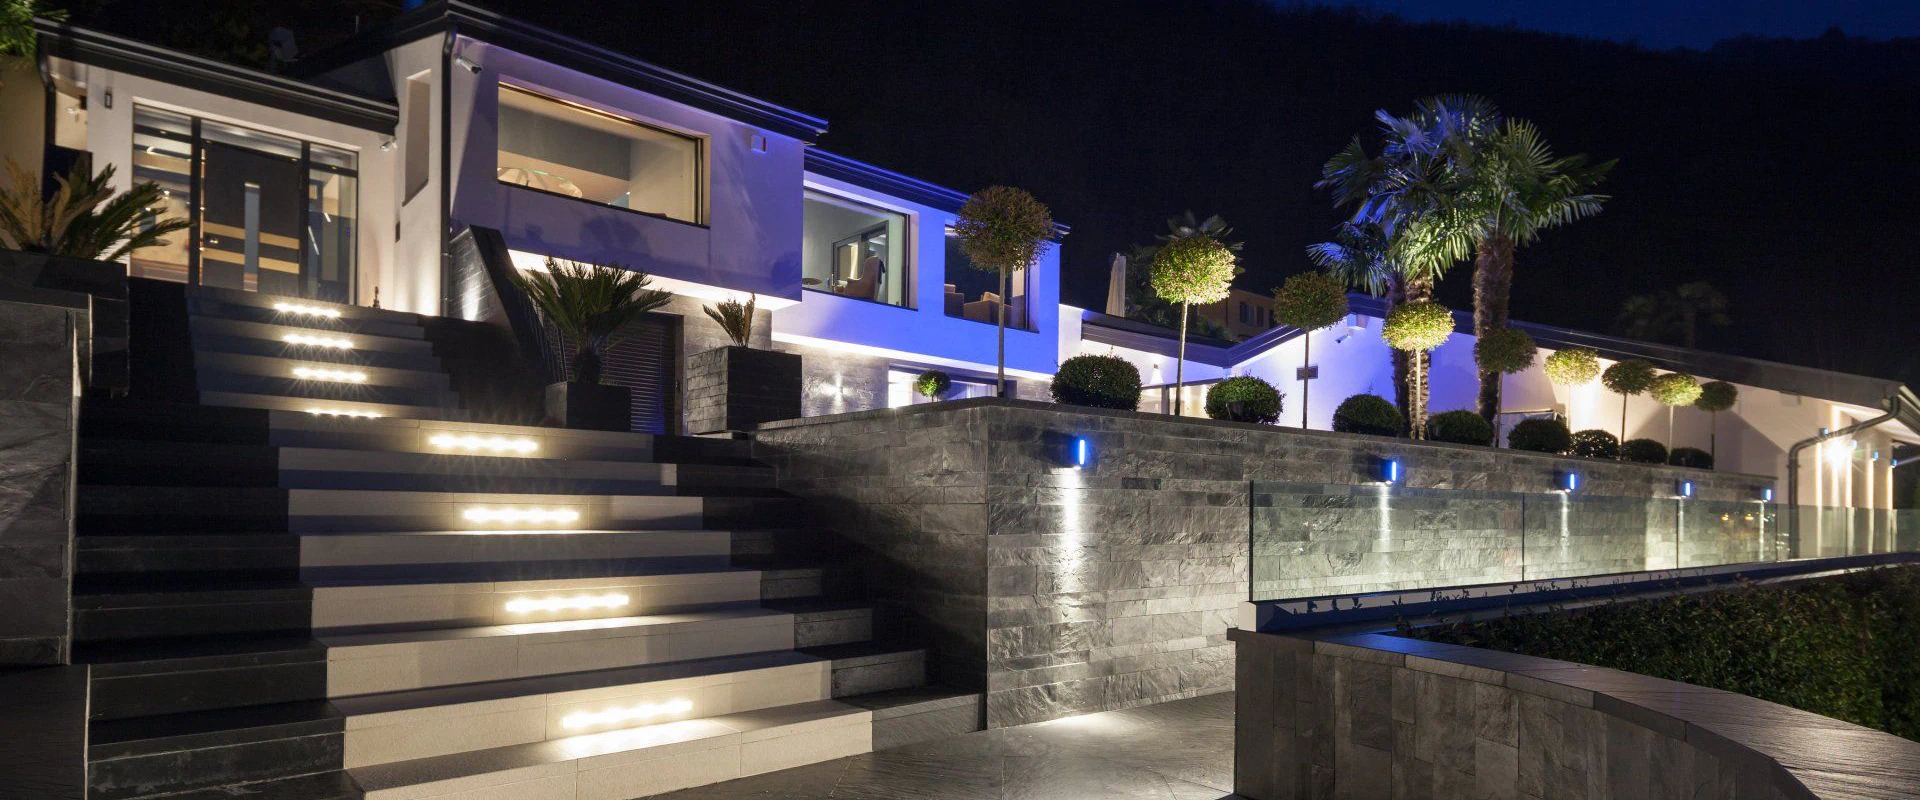 luxurious and modern landscape lighting of residential house